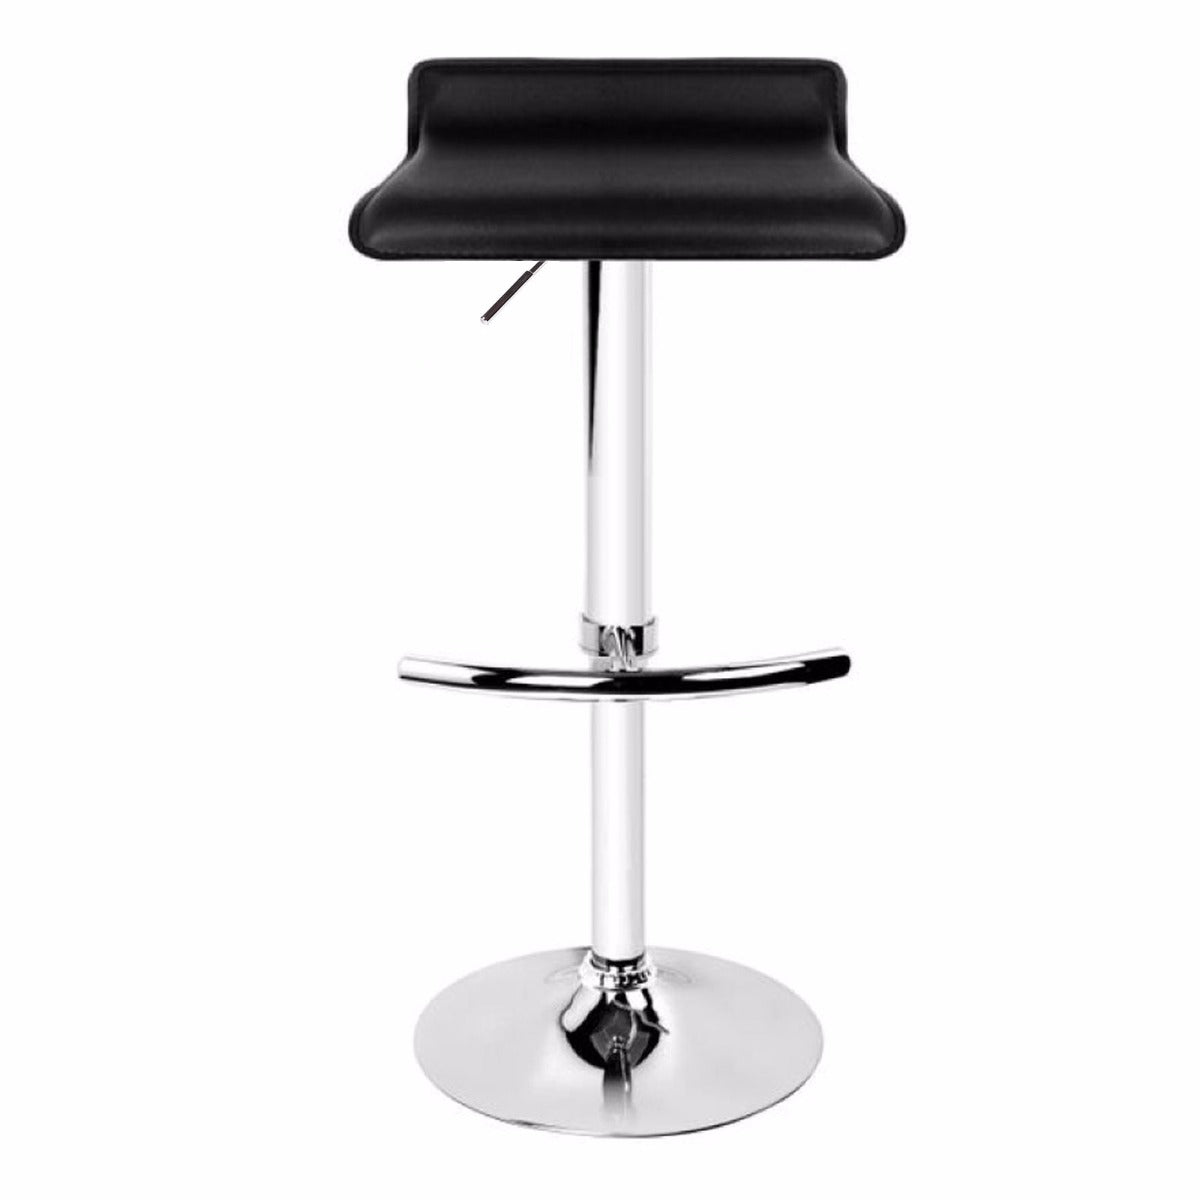 2X Black Bar Stools Faux Leather Low Back Adjustable Crome Base Gas Lift Slim Seat Swivel Chairs